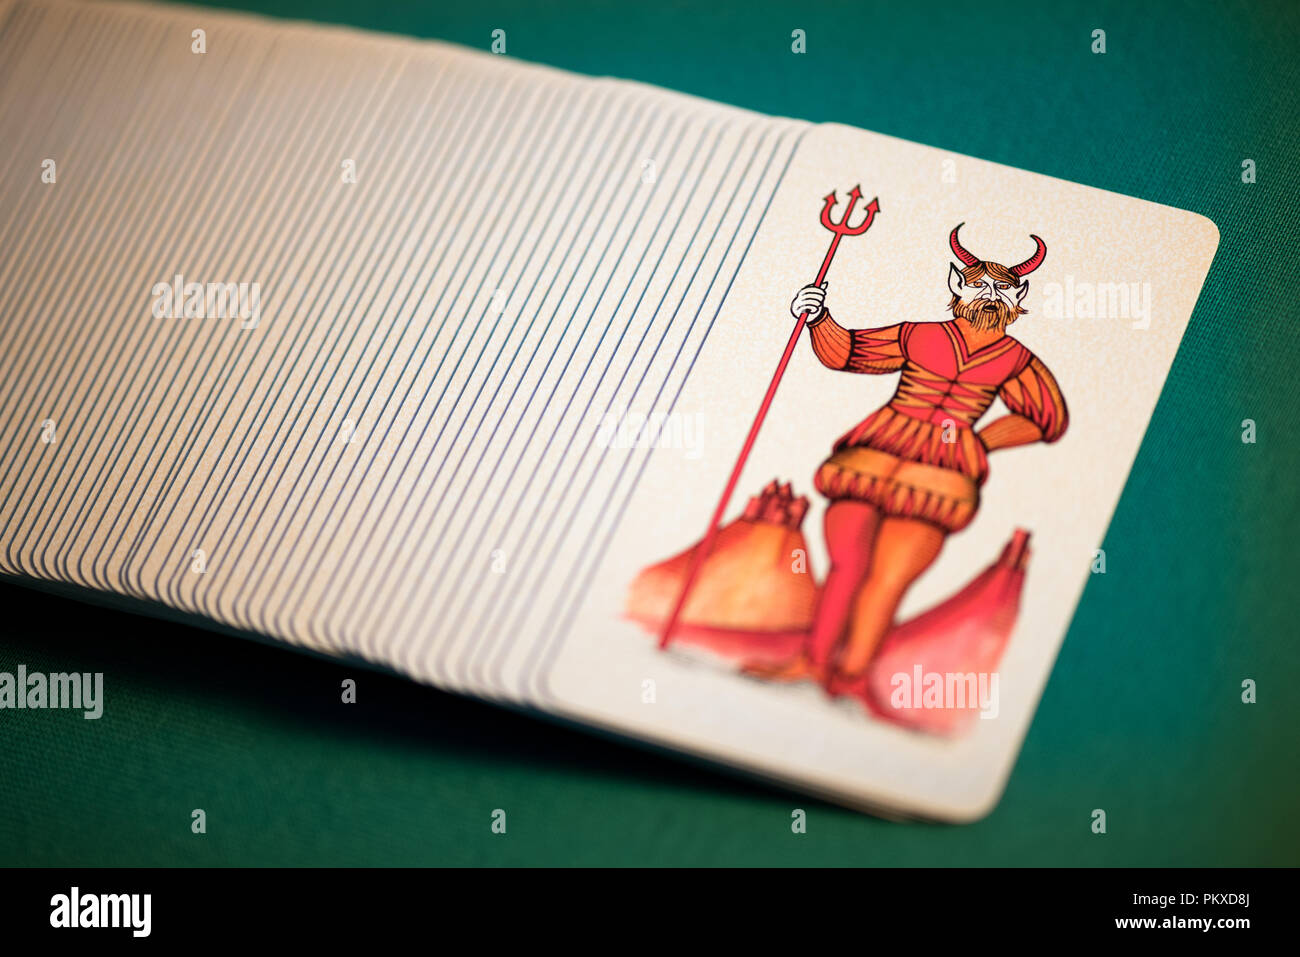 Pack of symbolic pictorial Tarot cards with the Devil or Satan uppermost spread out over a green background viewed close up high angle Stock Photo